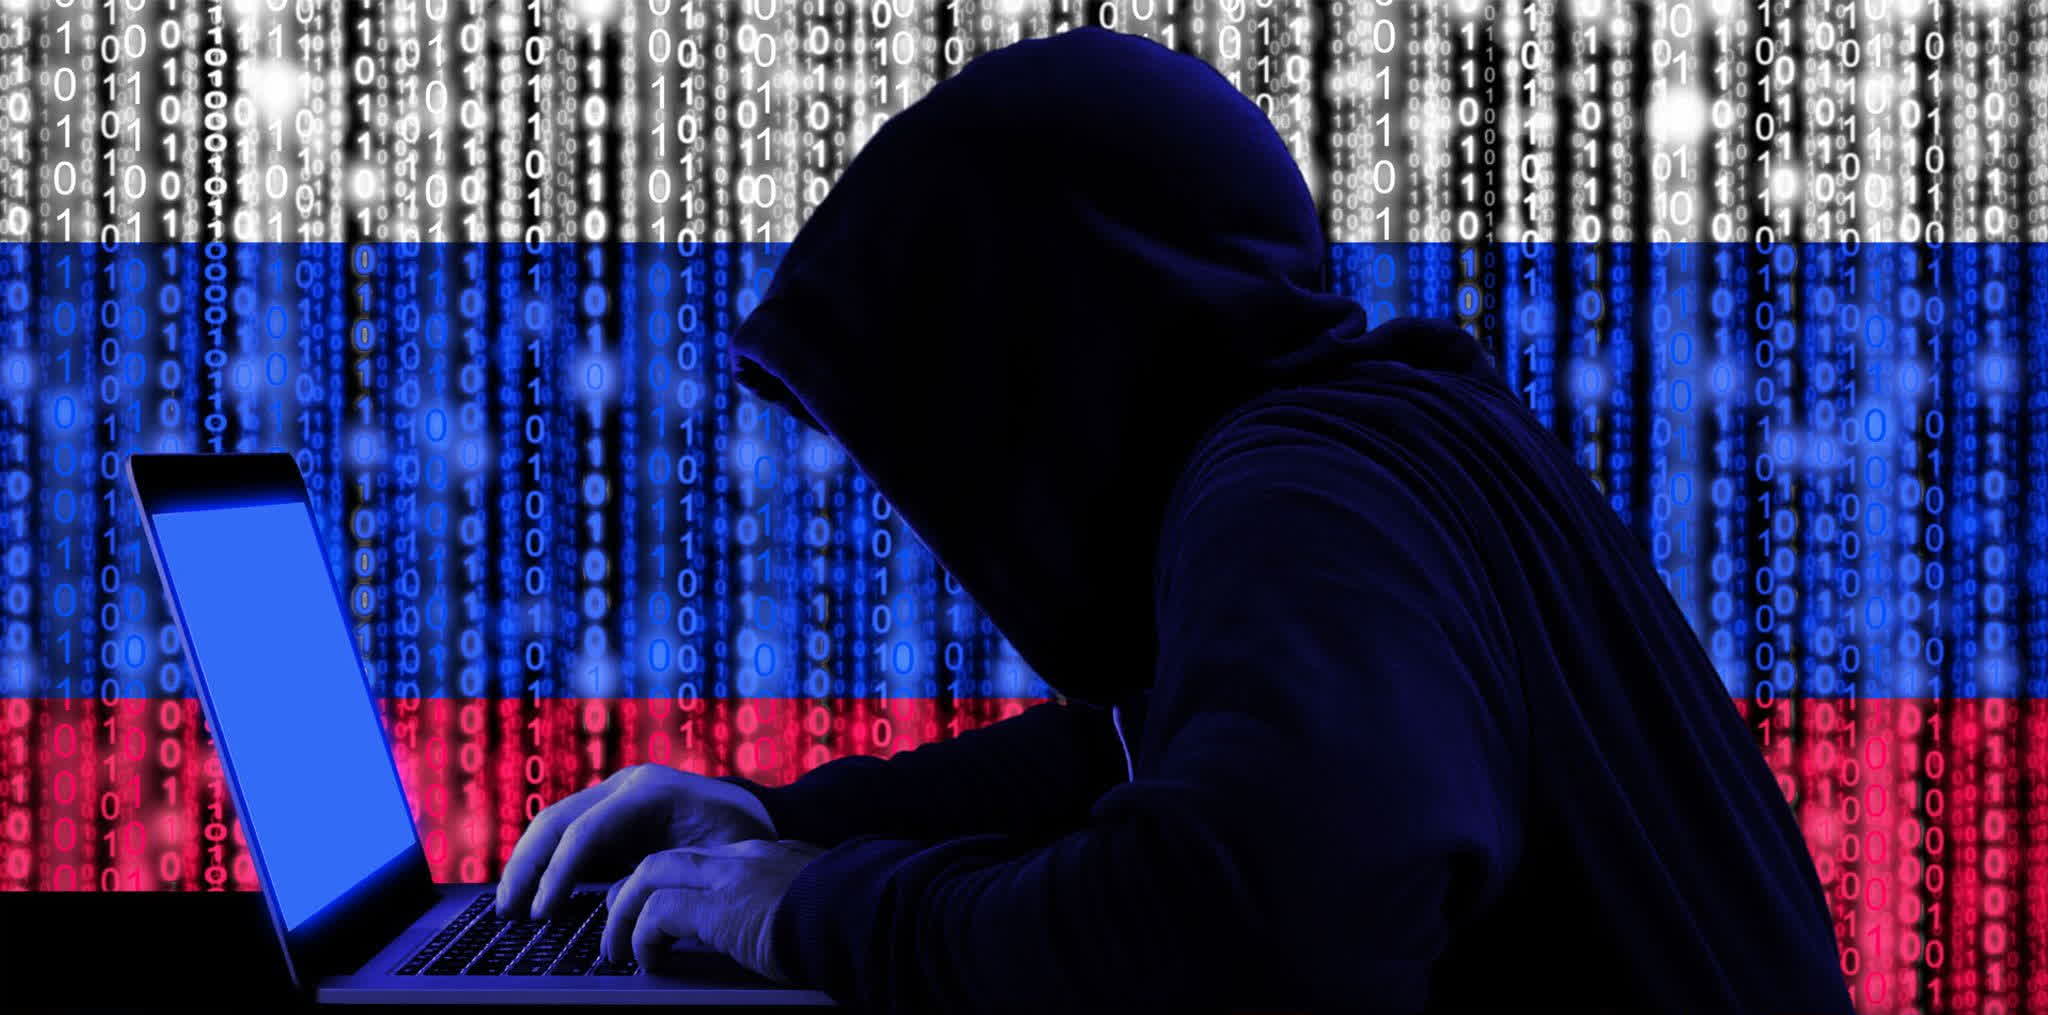 Russian cyber-spies identified in APT attacks against UK democracy